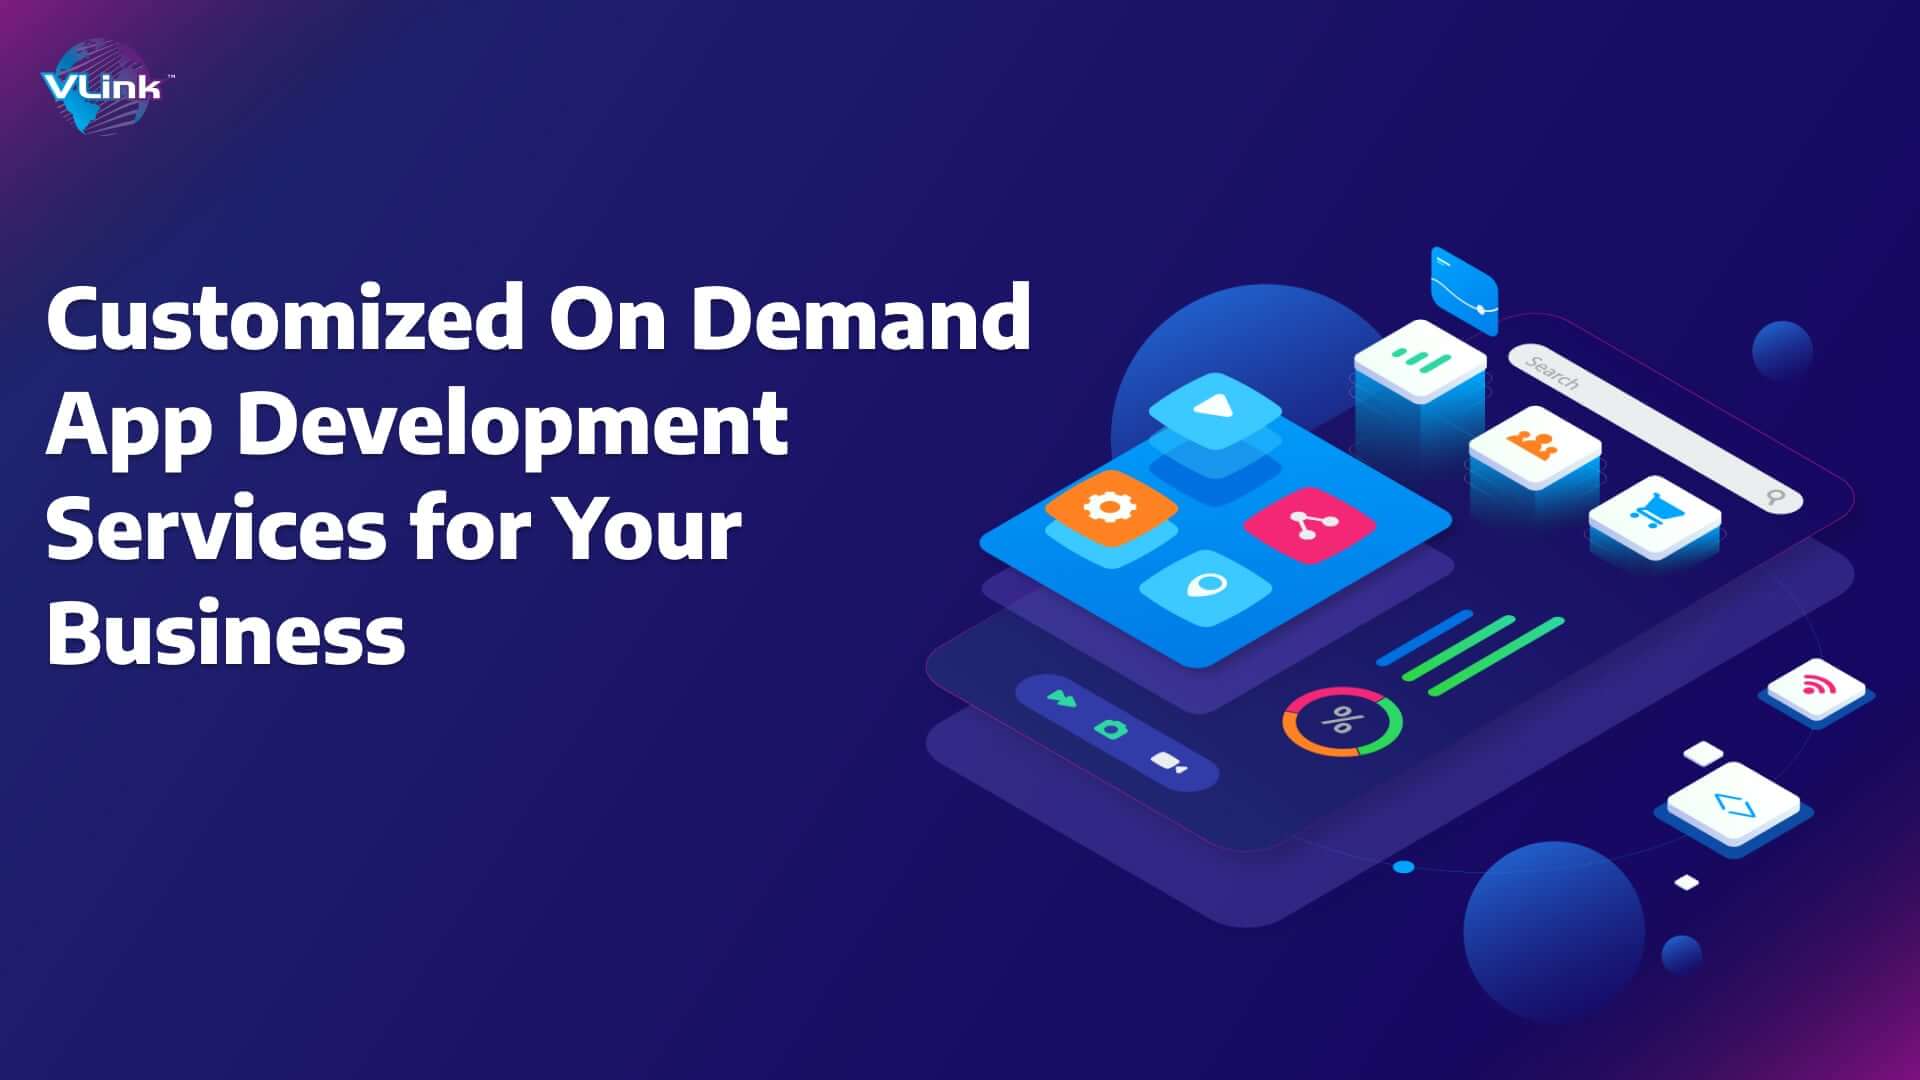 Get Fully Customized On-Demand App Development Services for Your Business